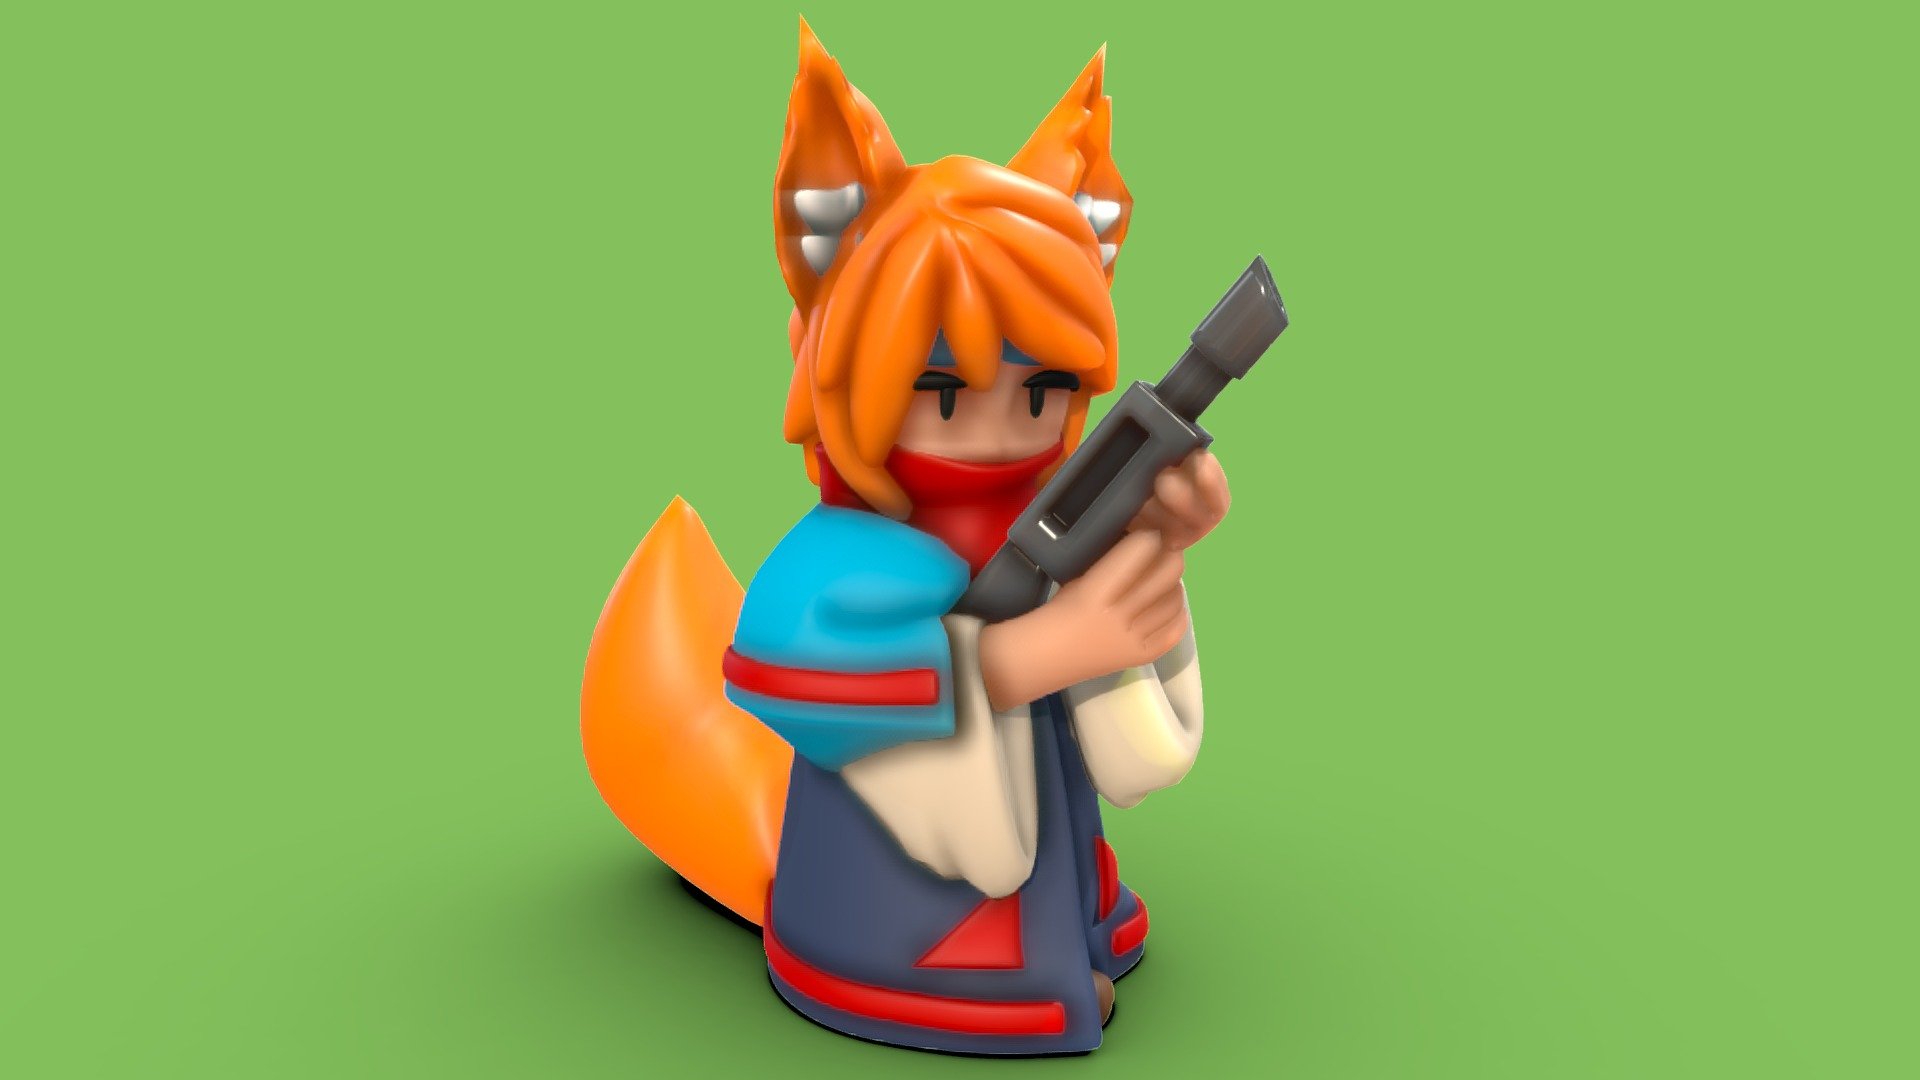 Trying to see if I could come up with a 3D printed miniature character design that would print well without supports, as well as print in very small sizes well - 3D Printed Mini Test - 3D model by Renafox (@kryik1023) 3d model